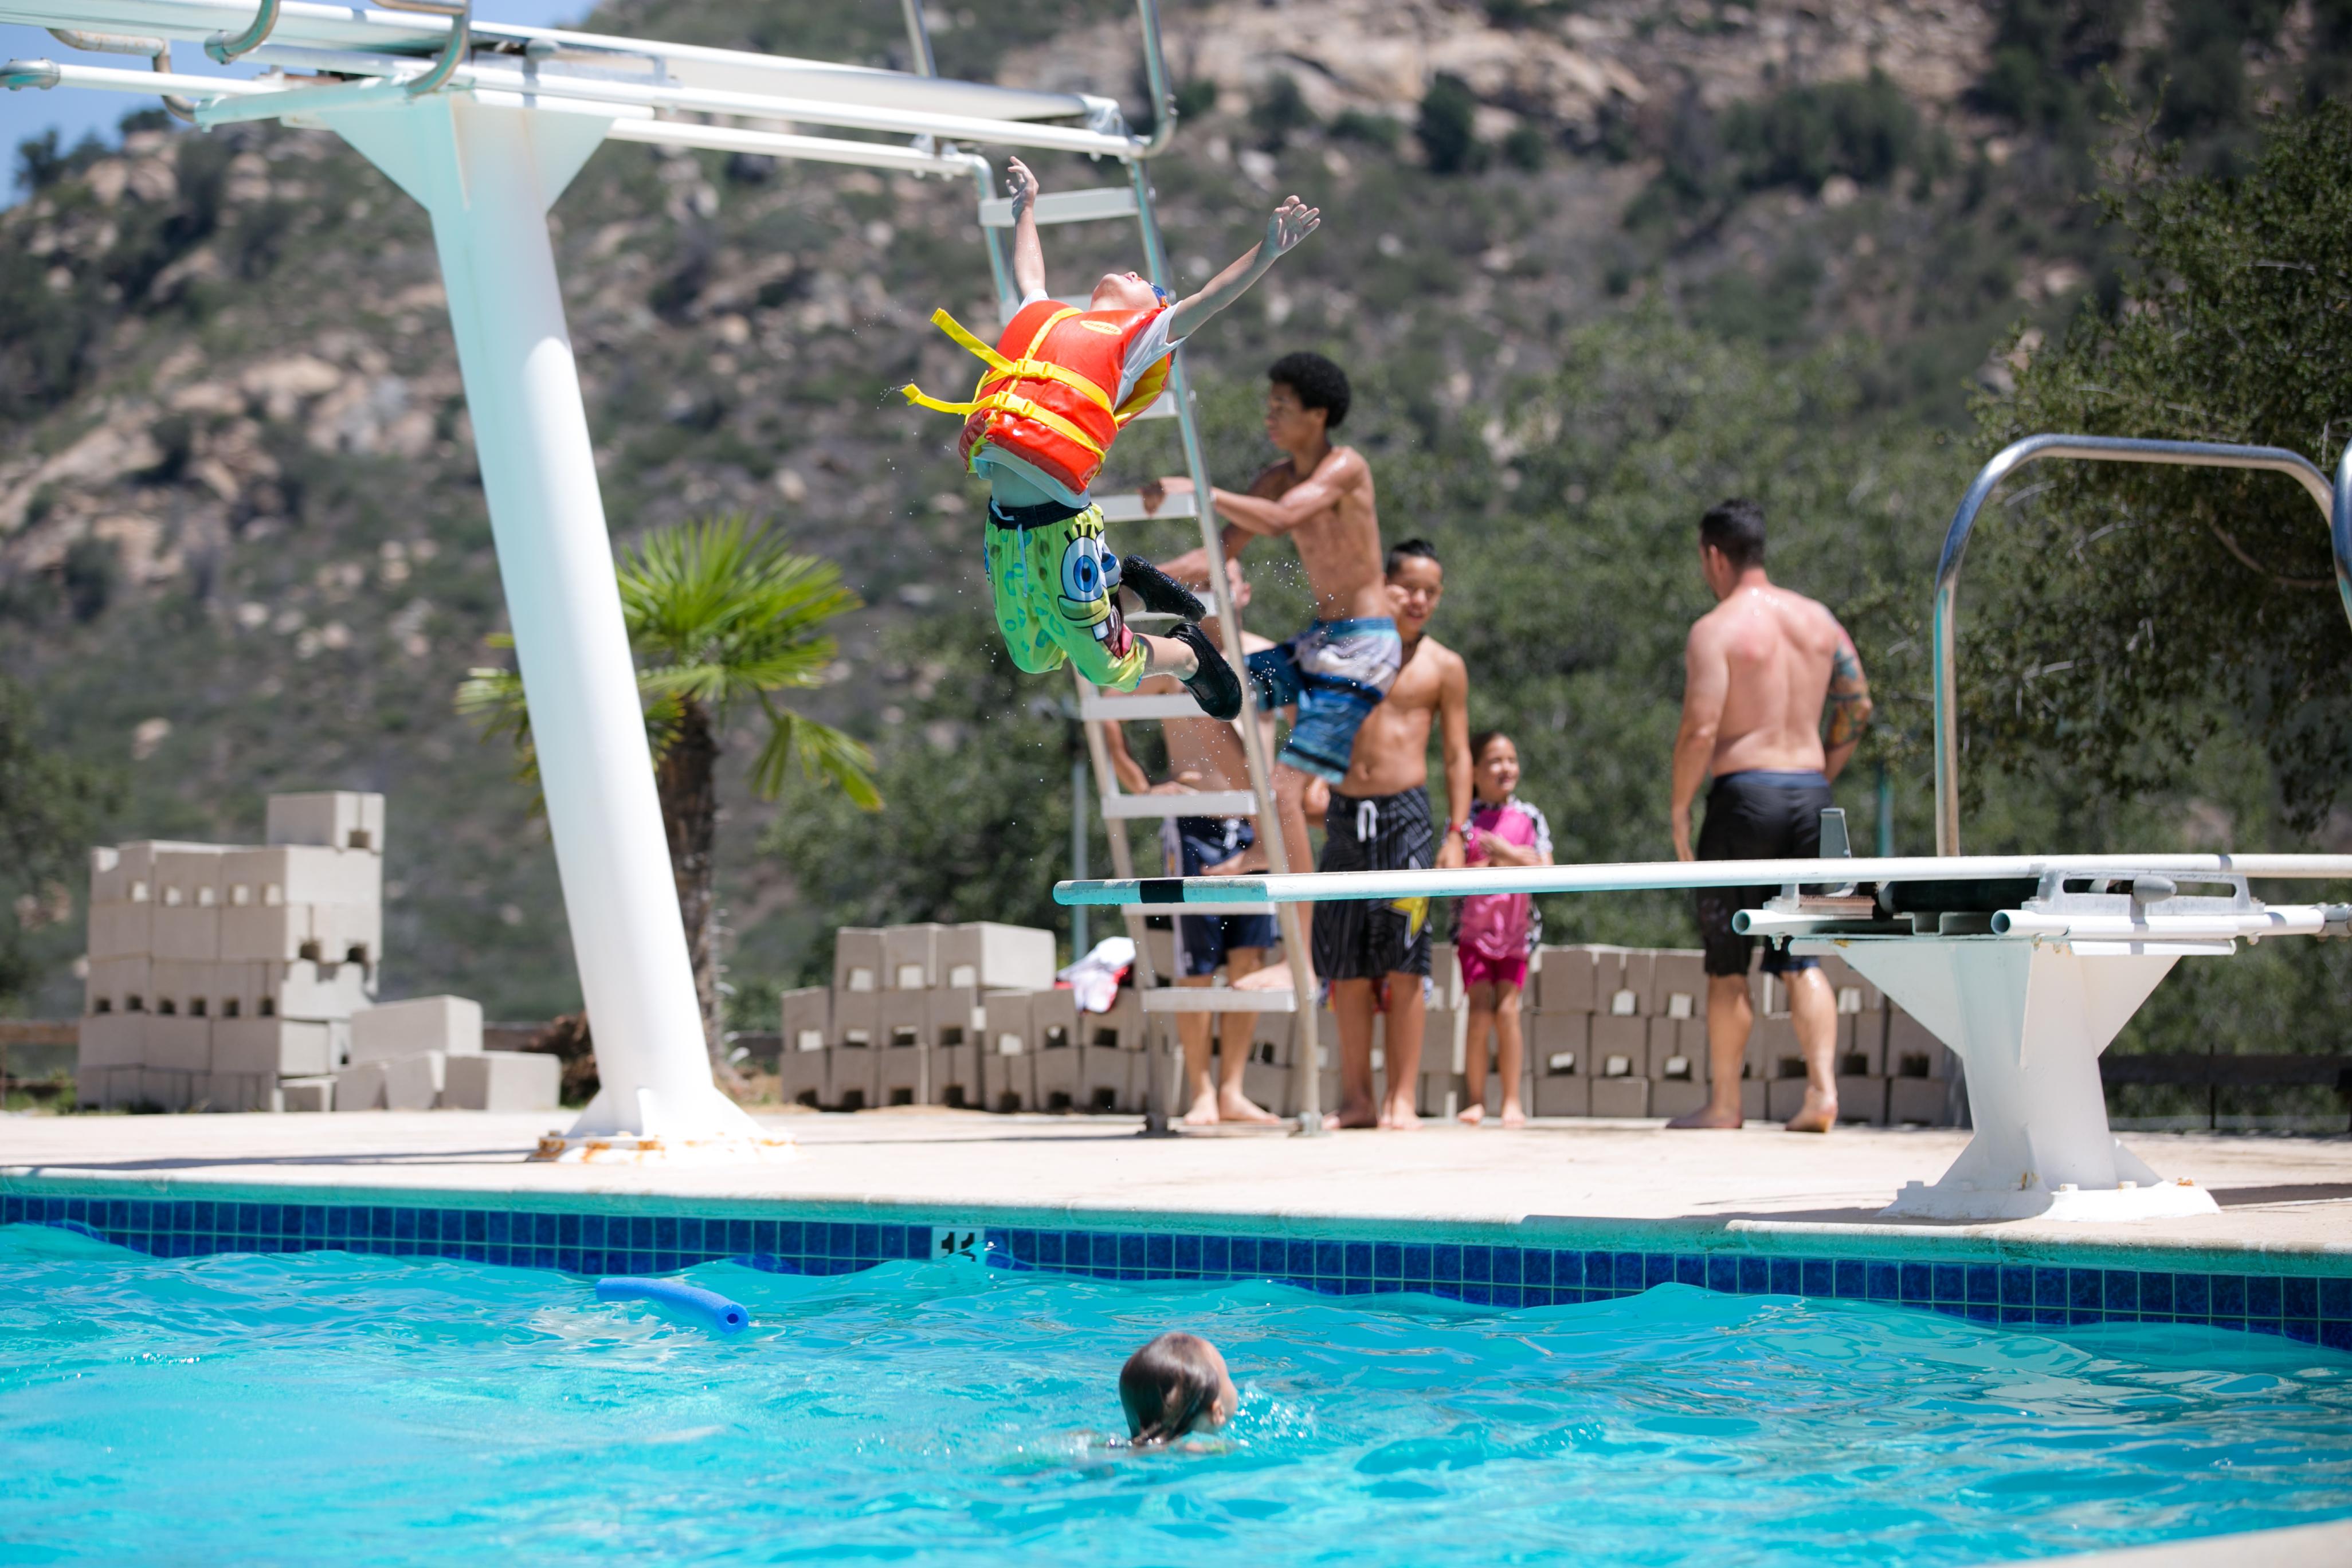 Swimming pool at Camp Beyond the Scars offers exercise and fun.